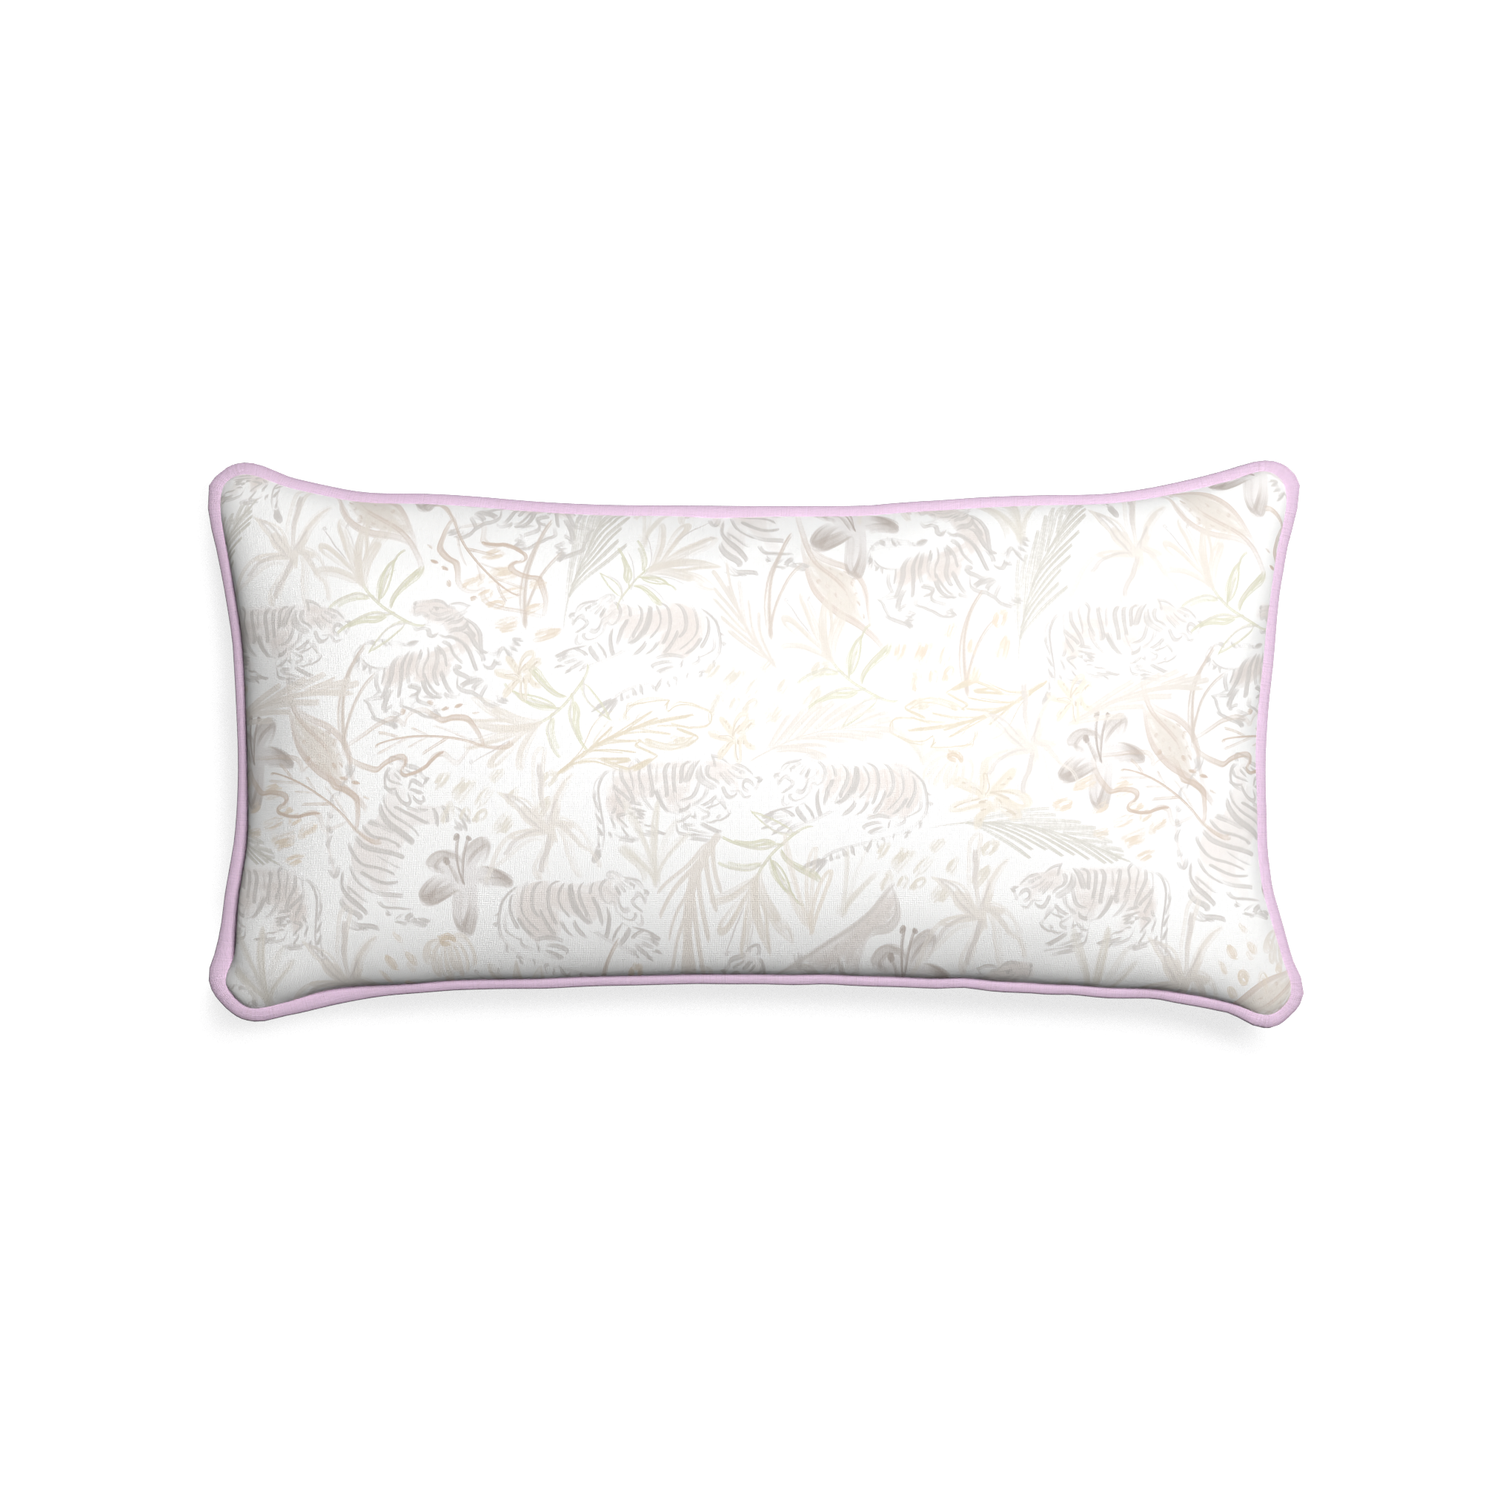 Midi-lumbar frida sand custom beige chinoiserie tigerpillow with l piping on white background